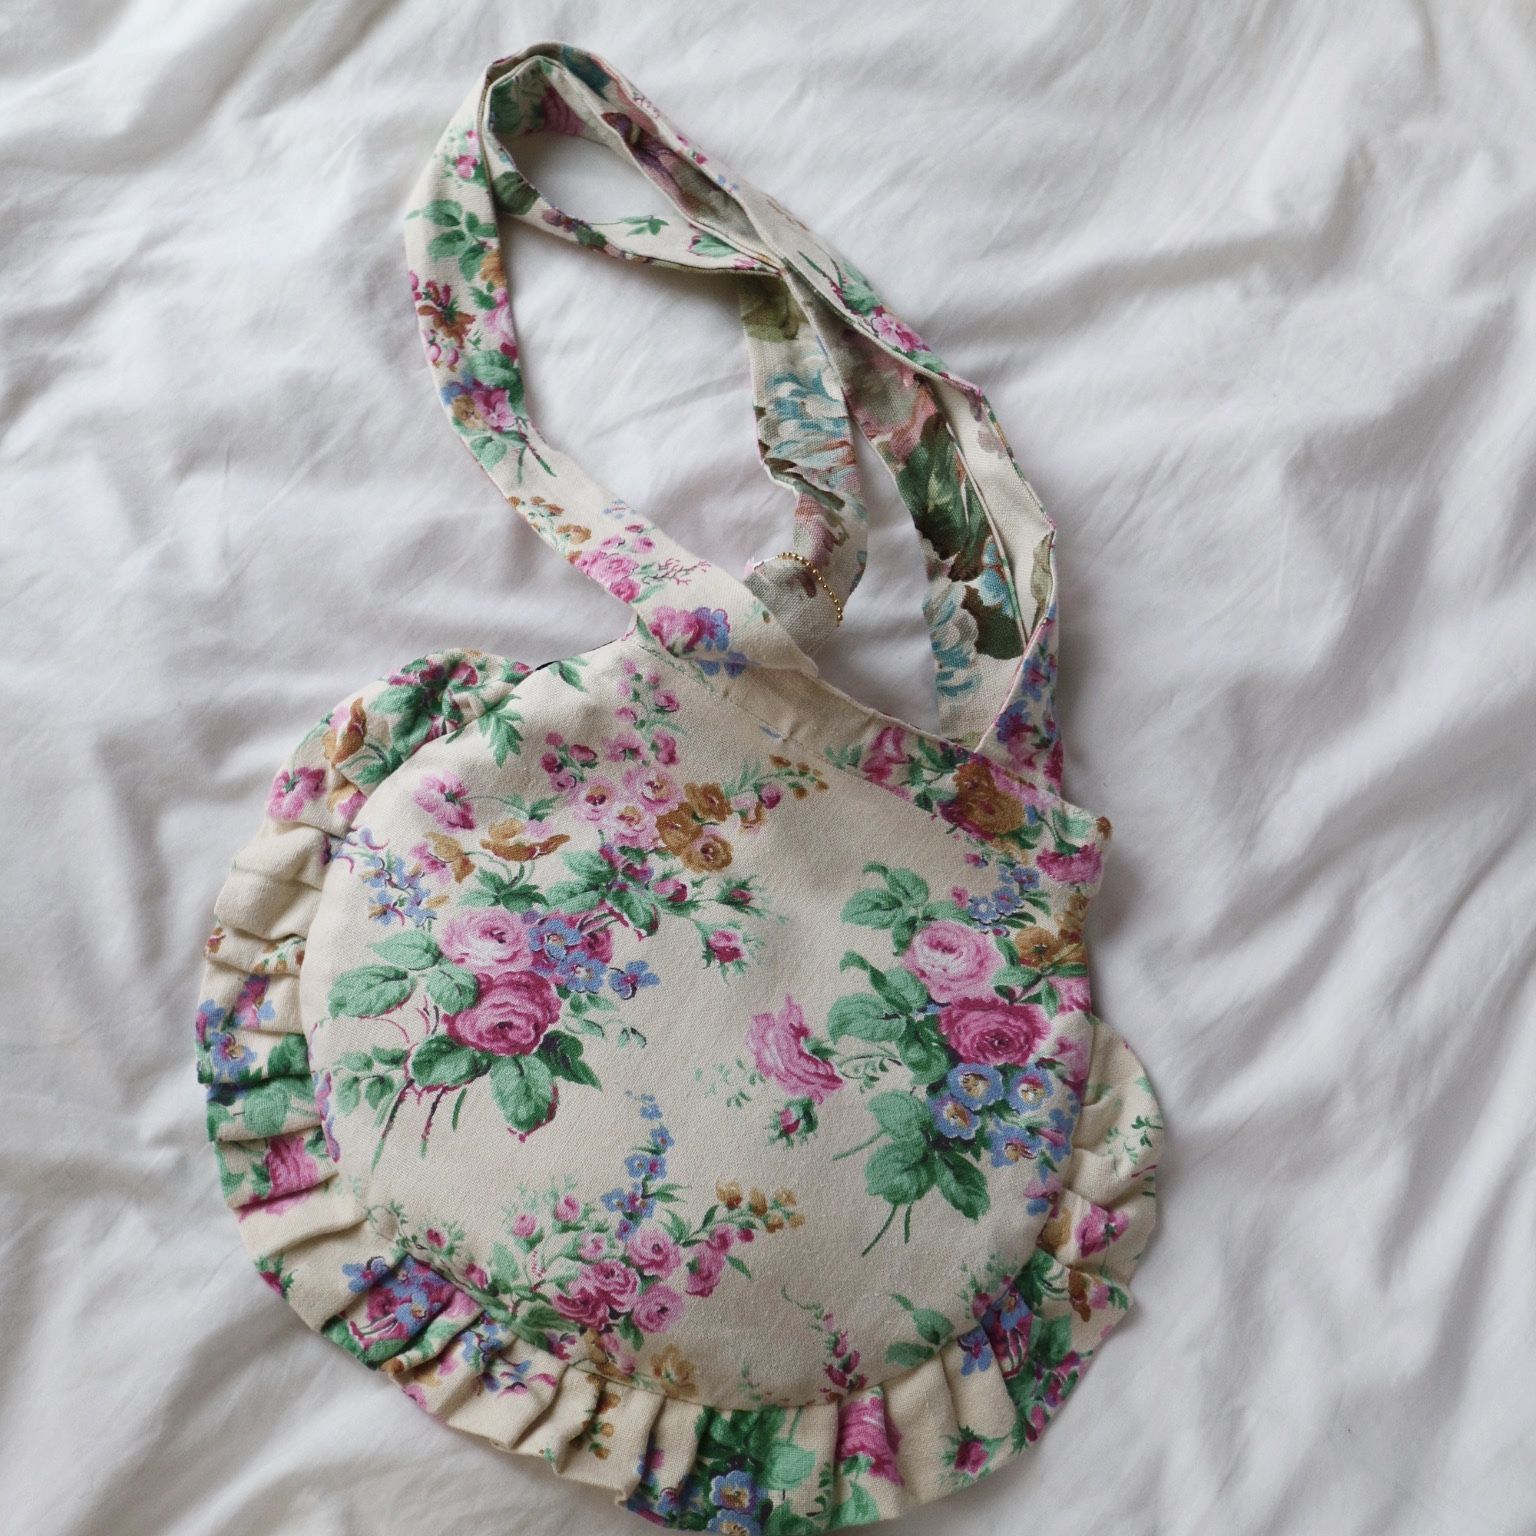 THE MAGPIE AND THE WARDROBE FRILLY BAG – GIGINA